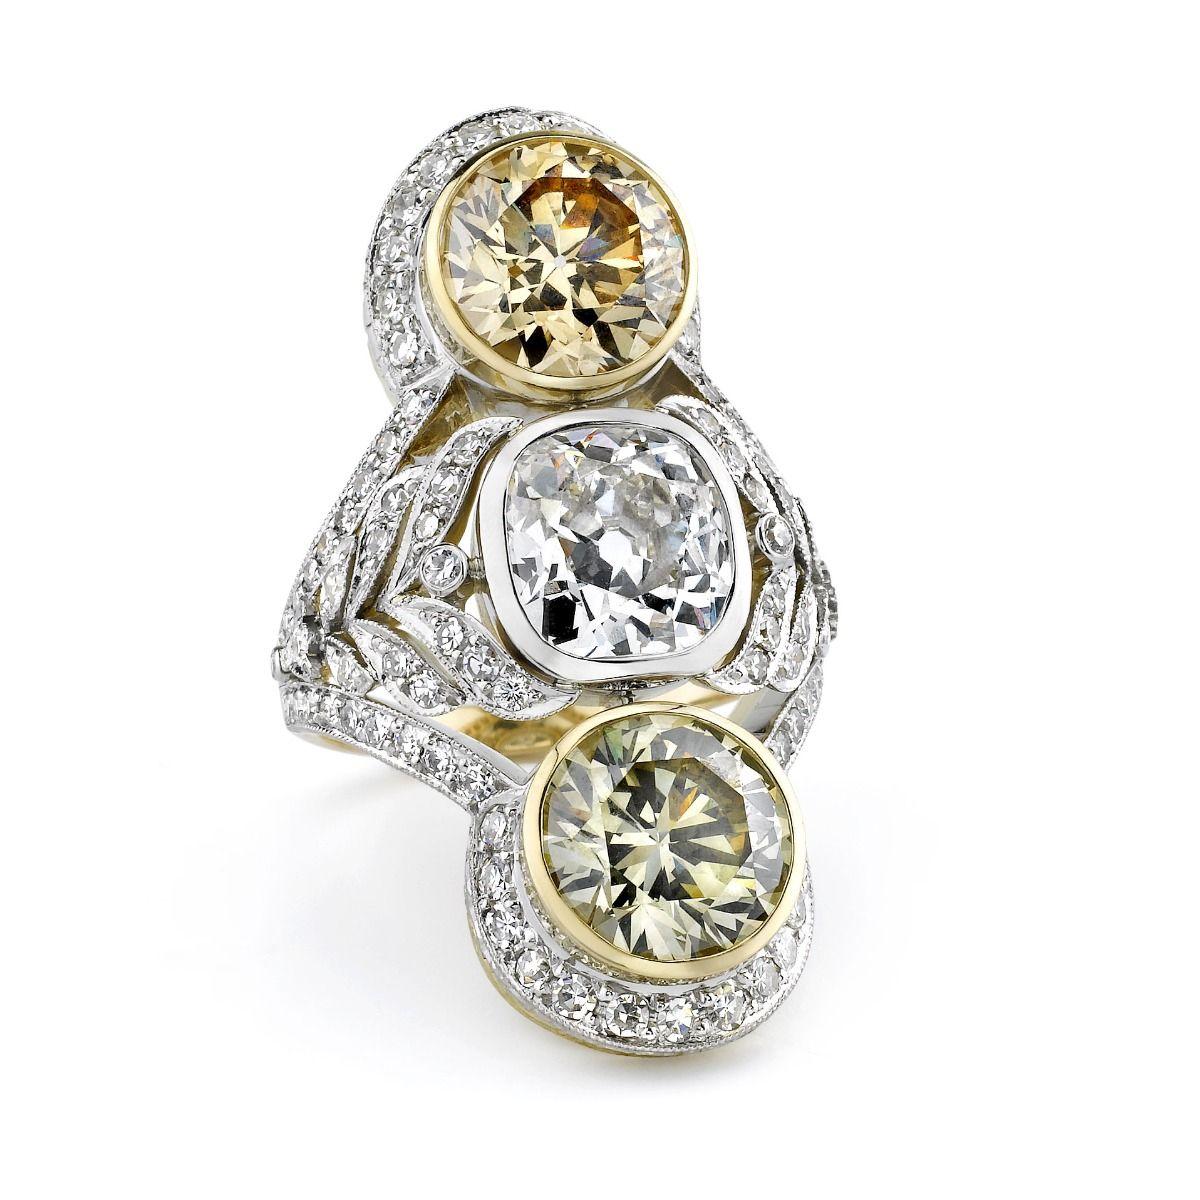 This trio of bezel-set diamonds are distinguished within this elongated Edwardian inspired ring. Designed as platinum millegraining paired with 18k yellow gold naturalistic motifs, embellished throughout by 95 round-cut diamonds weighing 0.72 ct.
